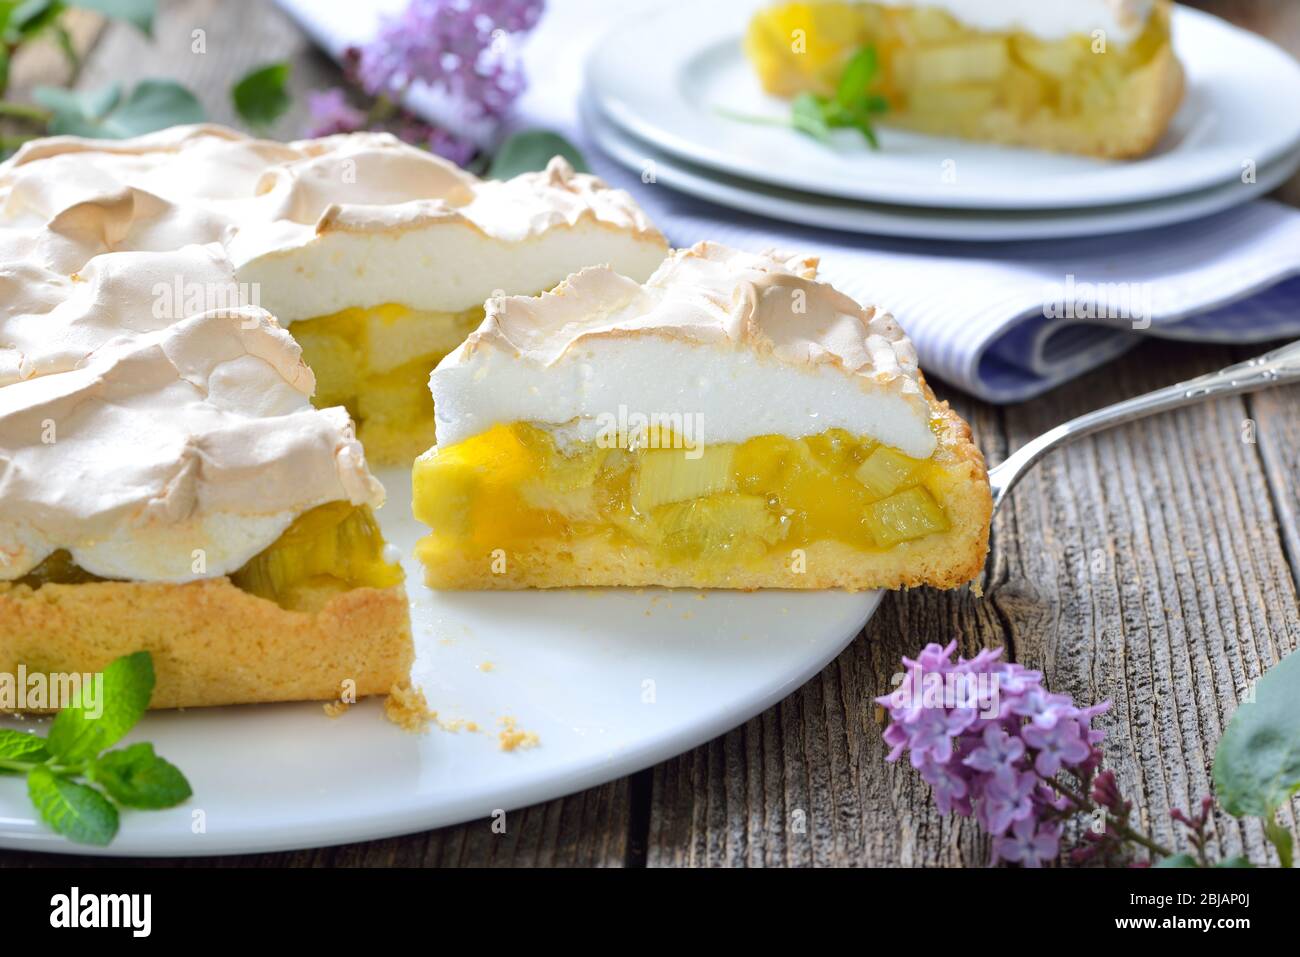 Delicious rhubarb cake topped with sweet meringue served on a wooden table with springlike lilac decoration Stock Photo